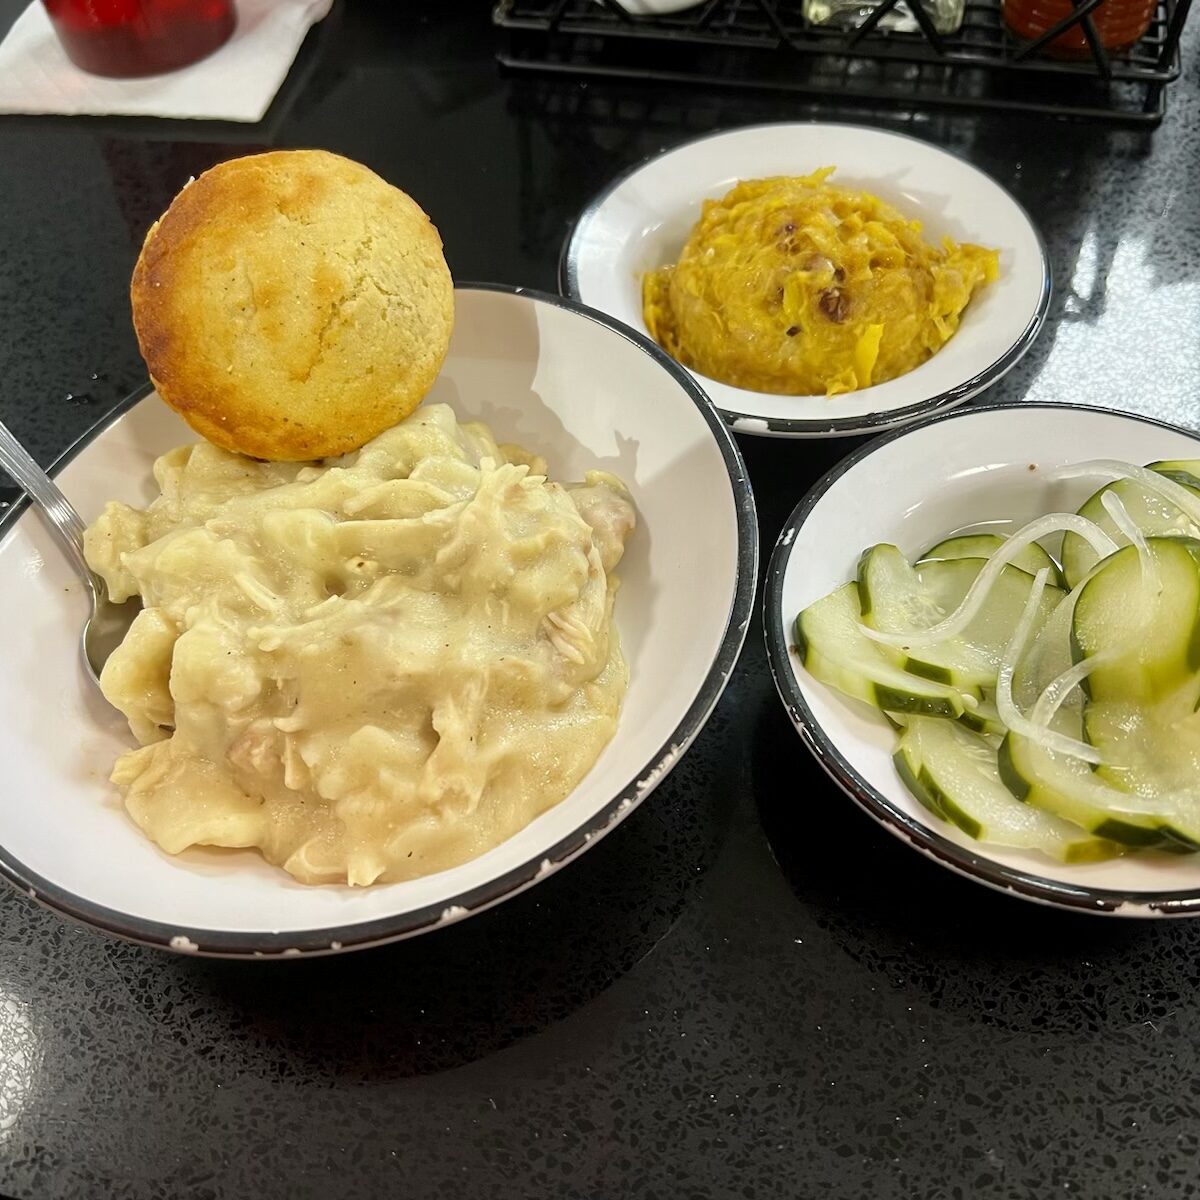 Chicken-and-Dumplings-with-Squash-Casserole-and-Cucumber-Salad-Brad-Blankenship-1-1176